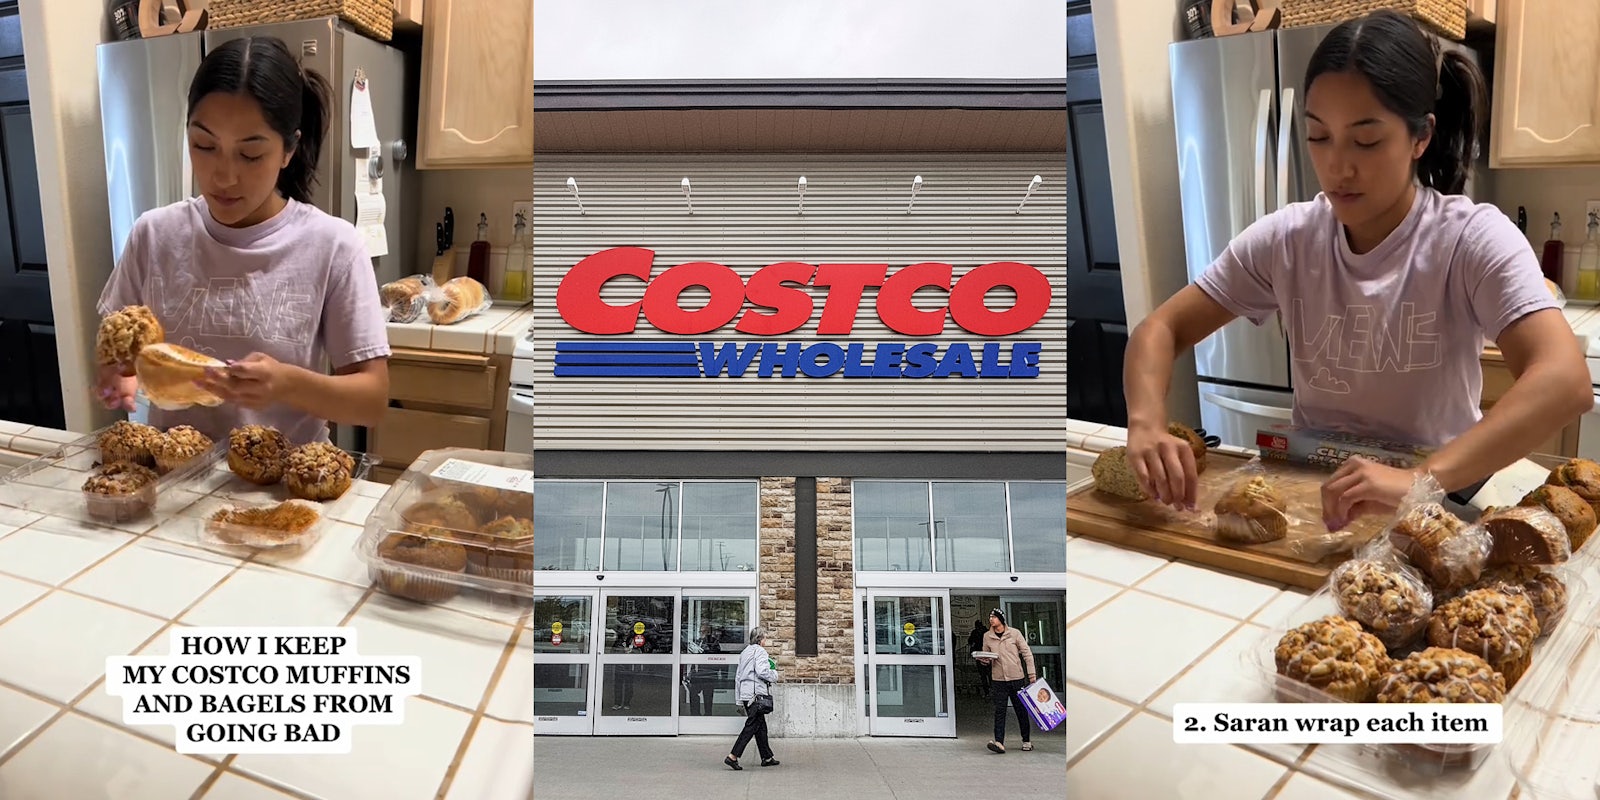 Costco customer with muffins on counter with caption 'HOW I KEEP MY COSTCO MUFFINS AND BAGELS FROM GOING BAD' (l) Costco building with sign (c) Costco customer with muffins on counter with caption '2. Saran wrap each item' (r)